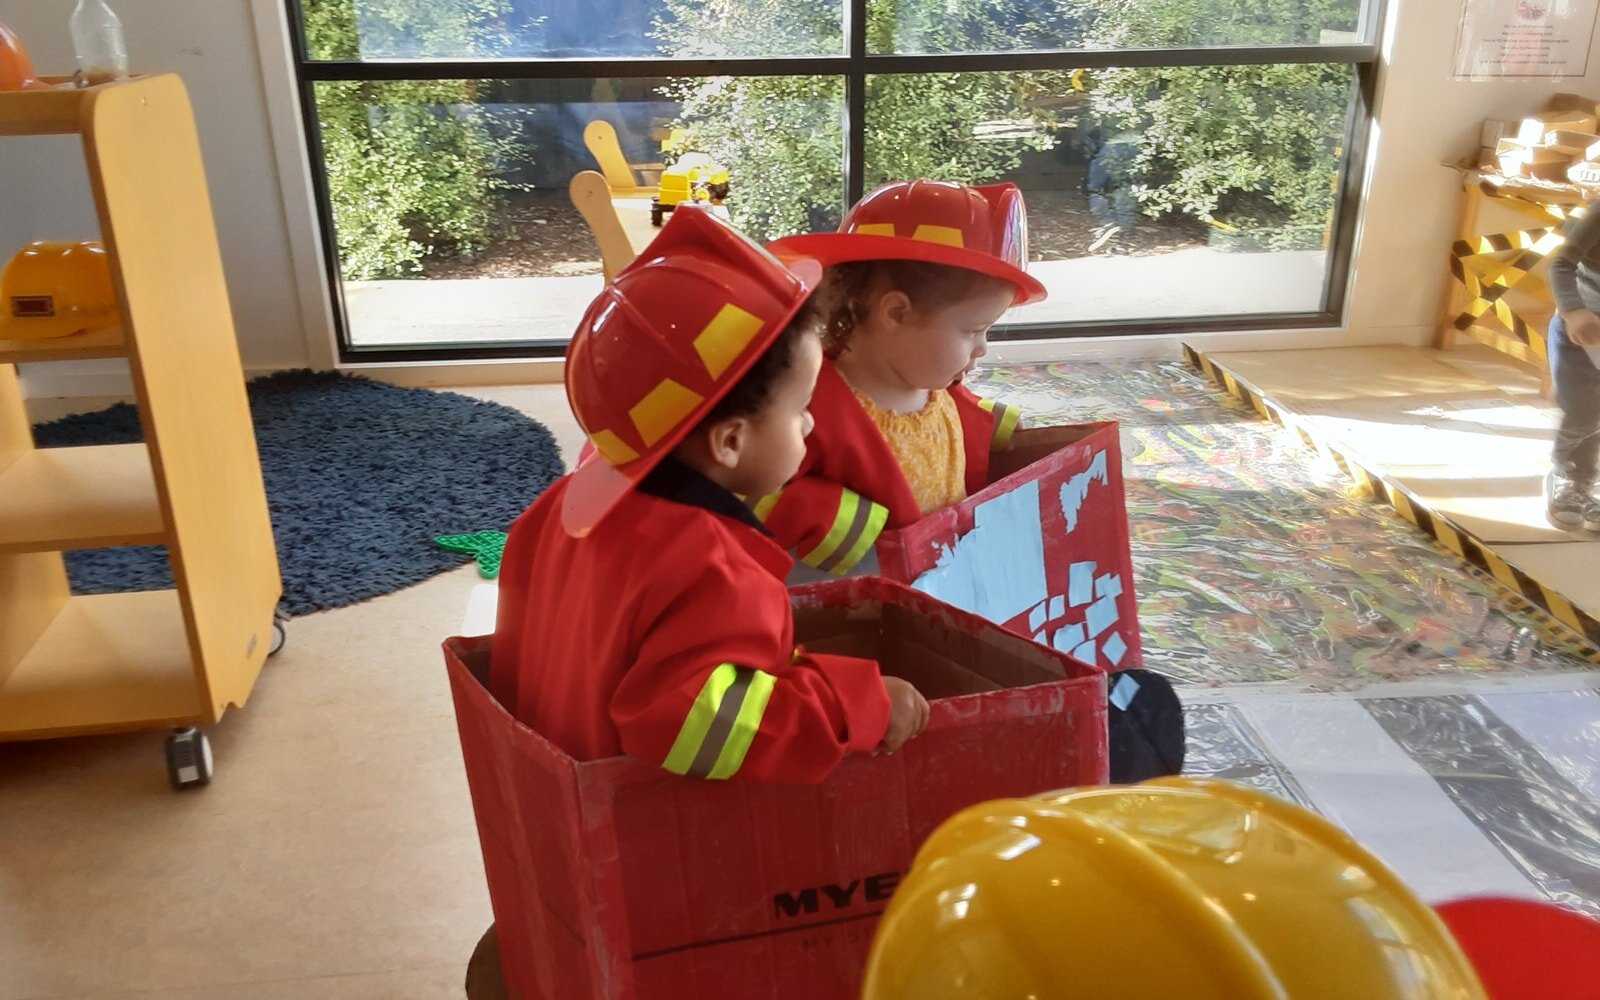 Safety in our community
We prepared our very own construction site with our toddler friends. 
Children engaged and contributed to our group project and were able to work collaboratively with each other.
We learnt the traffic light system for safety a